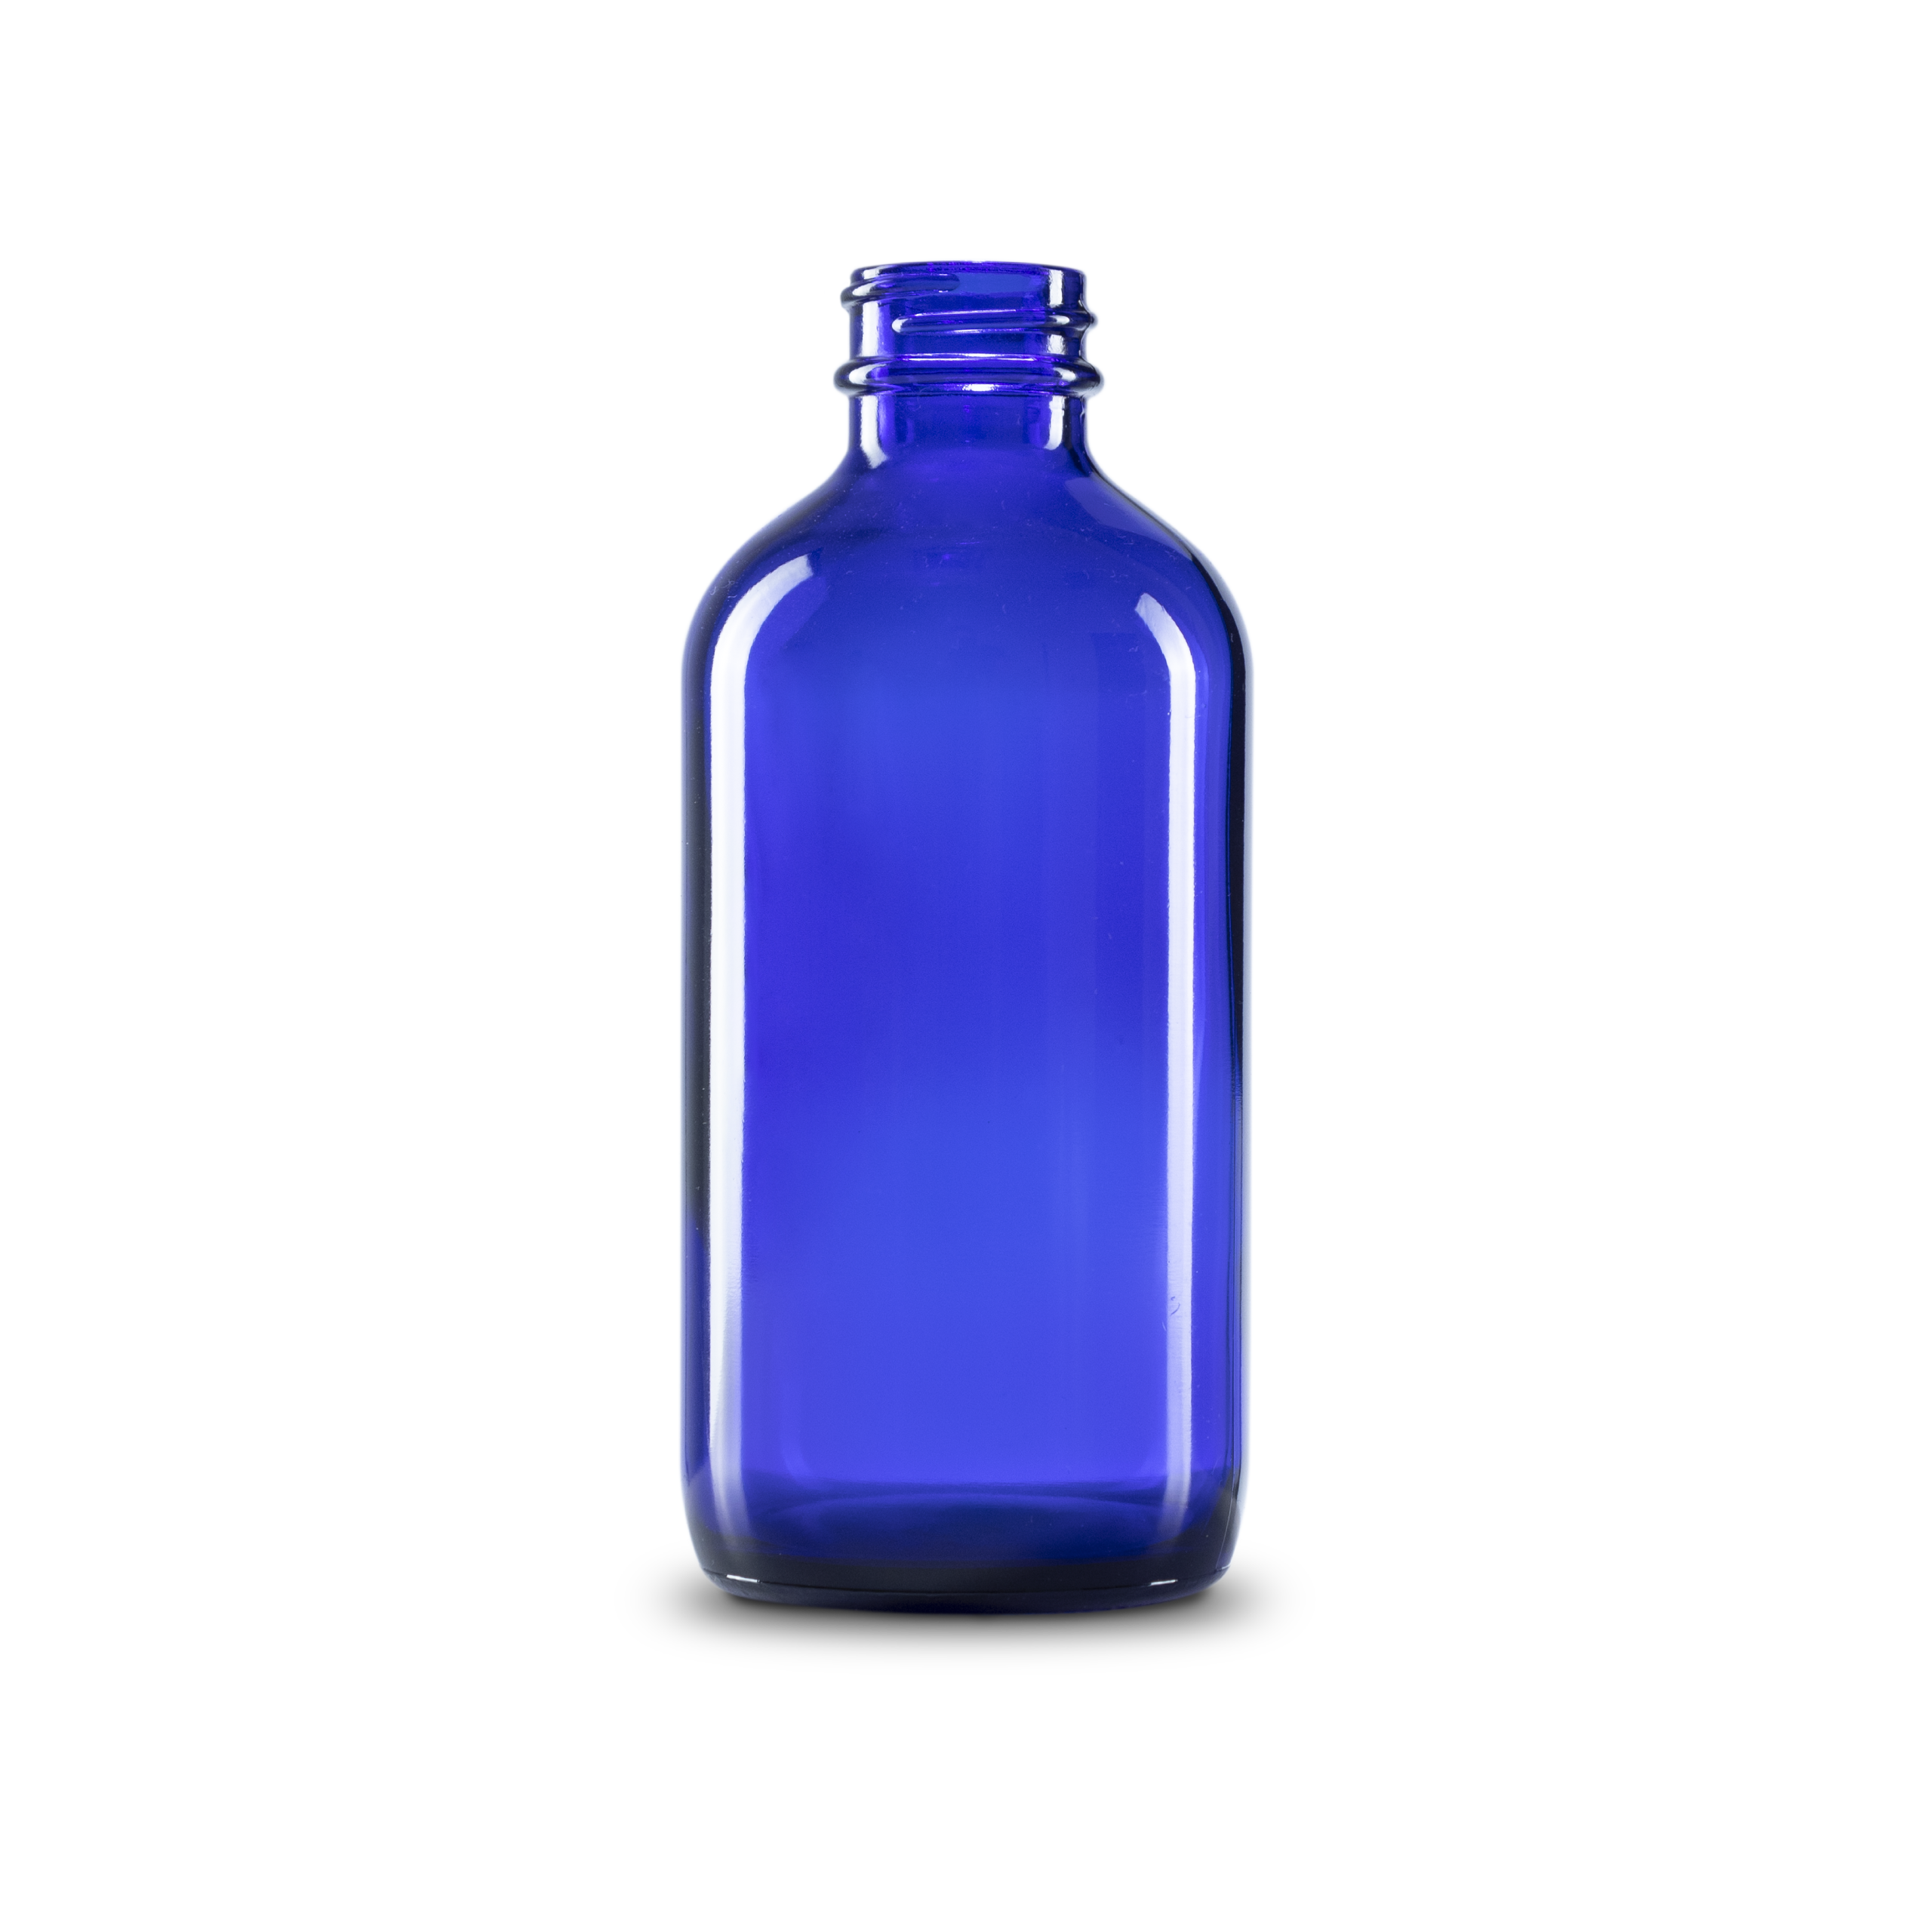 8 oz blue glass bottle is translucent, allowing you to see the contents. the smooth shape and rounded edges are comfortable to hold.